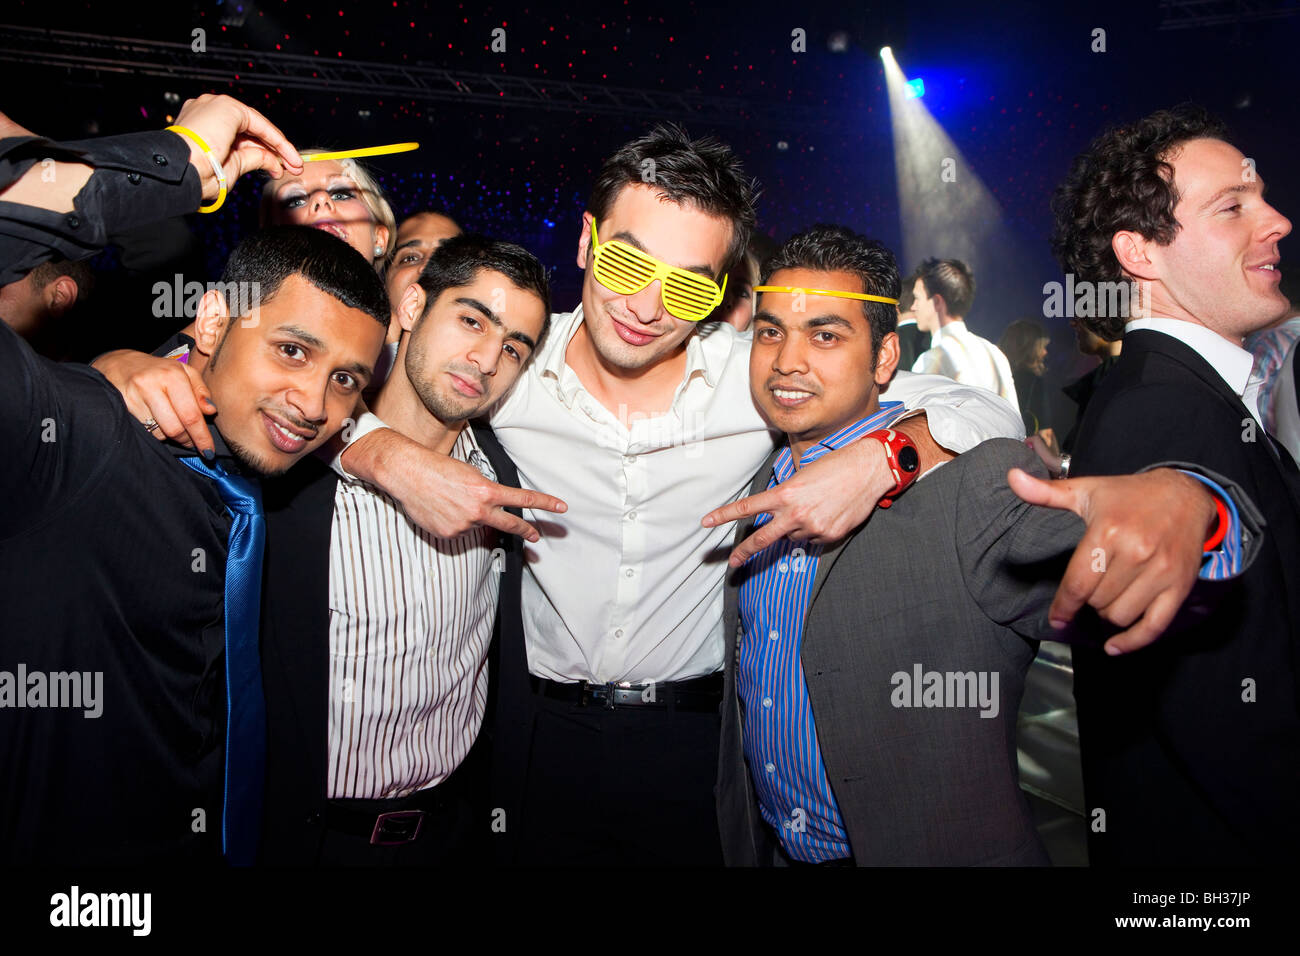 Asian Men Club High Resolution Stock Photography and Images - Alamy